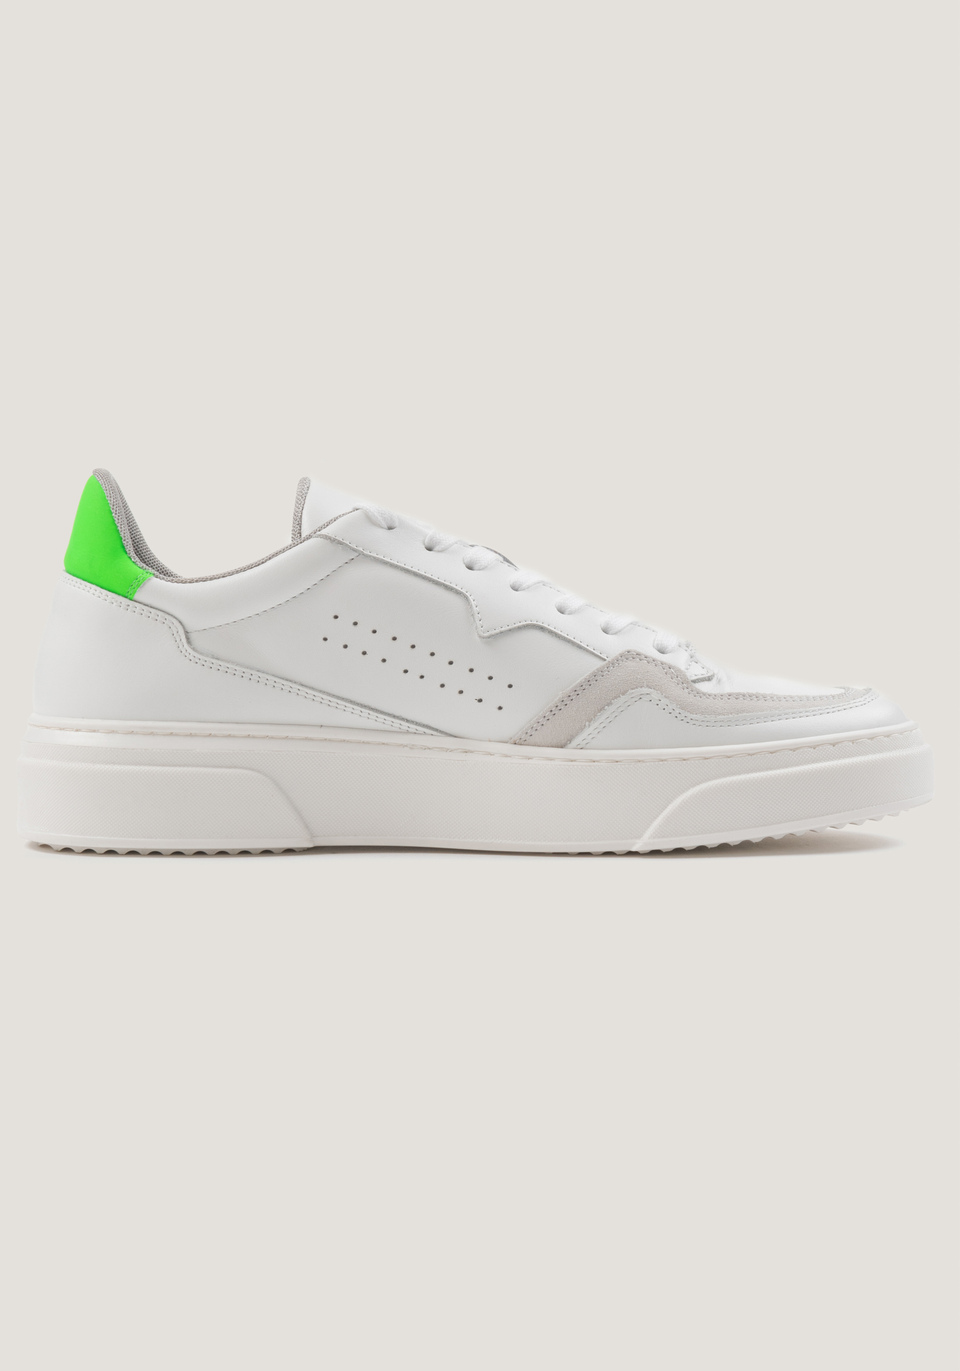 “RUSTLE” SNEAKER IN LEATHER WITH A NEON ACCENT - Antony Morato Online Shop